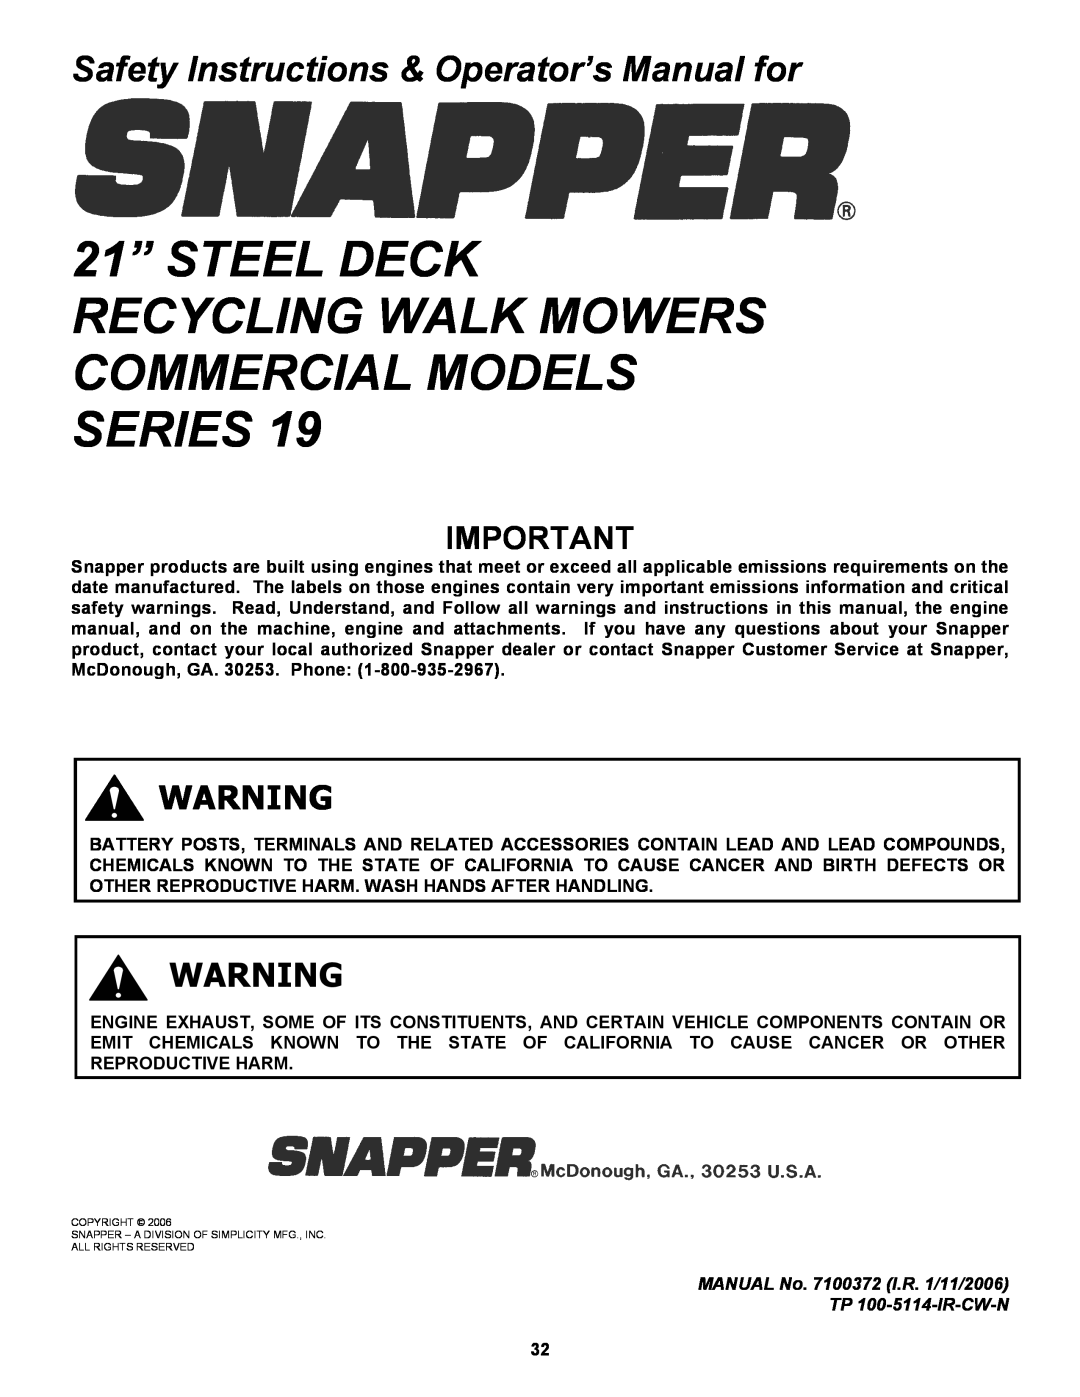 Snapper CRP216019KWV important safety instructions 21” STEEL DECK RECYCLING WALK MOWERS COMMERCIAL MODELS SERIES 